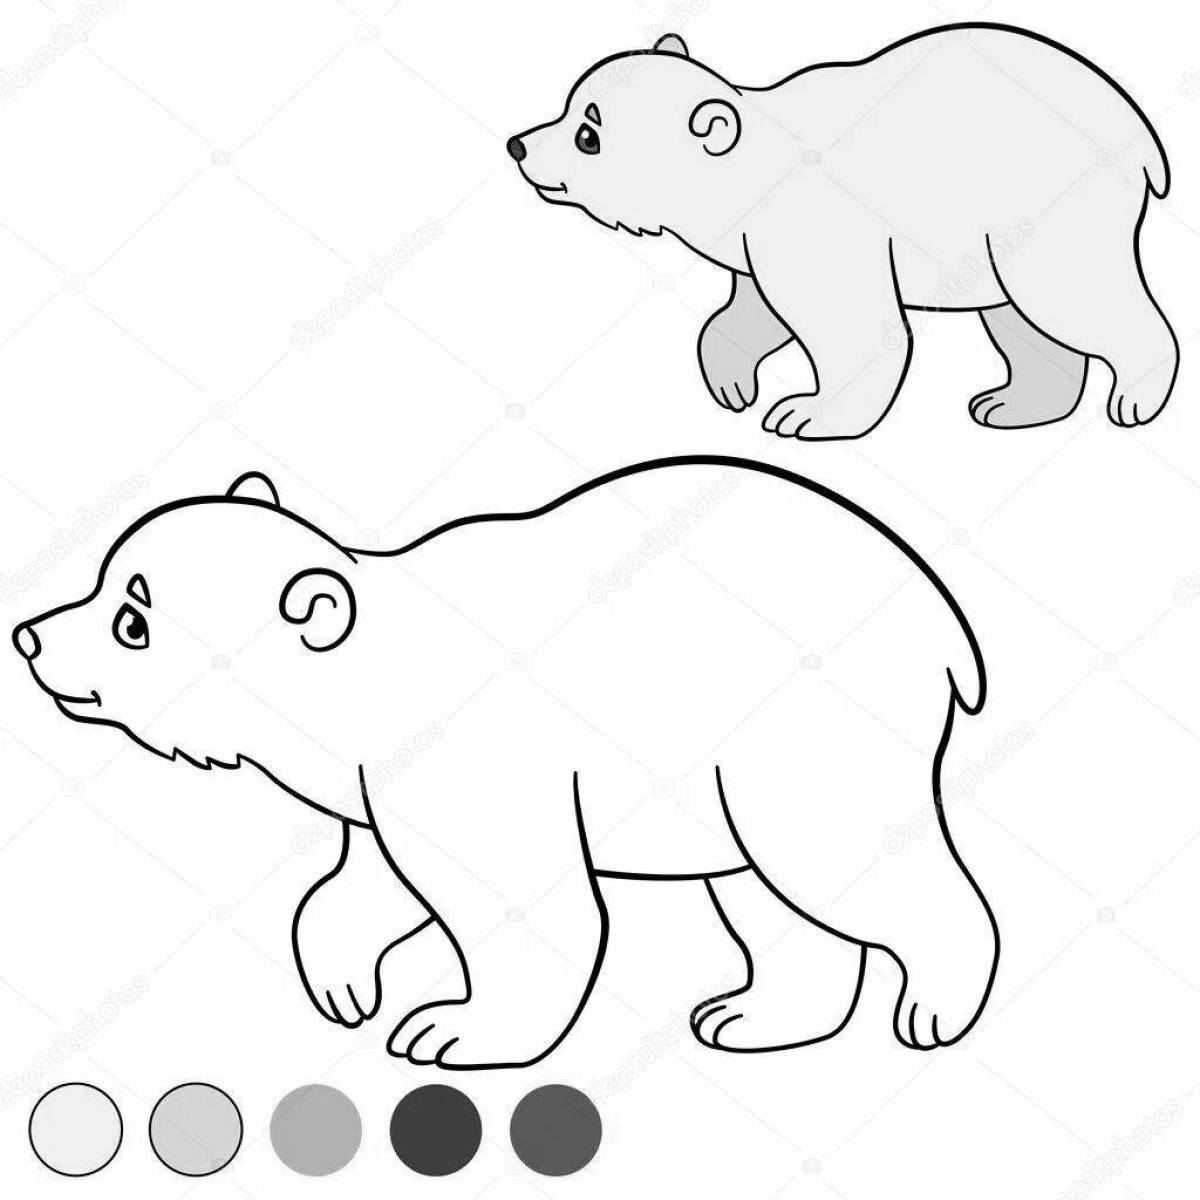 Coloring page filled with colors umka and bear